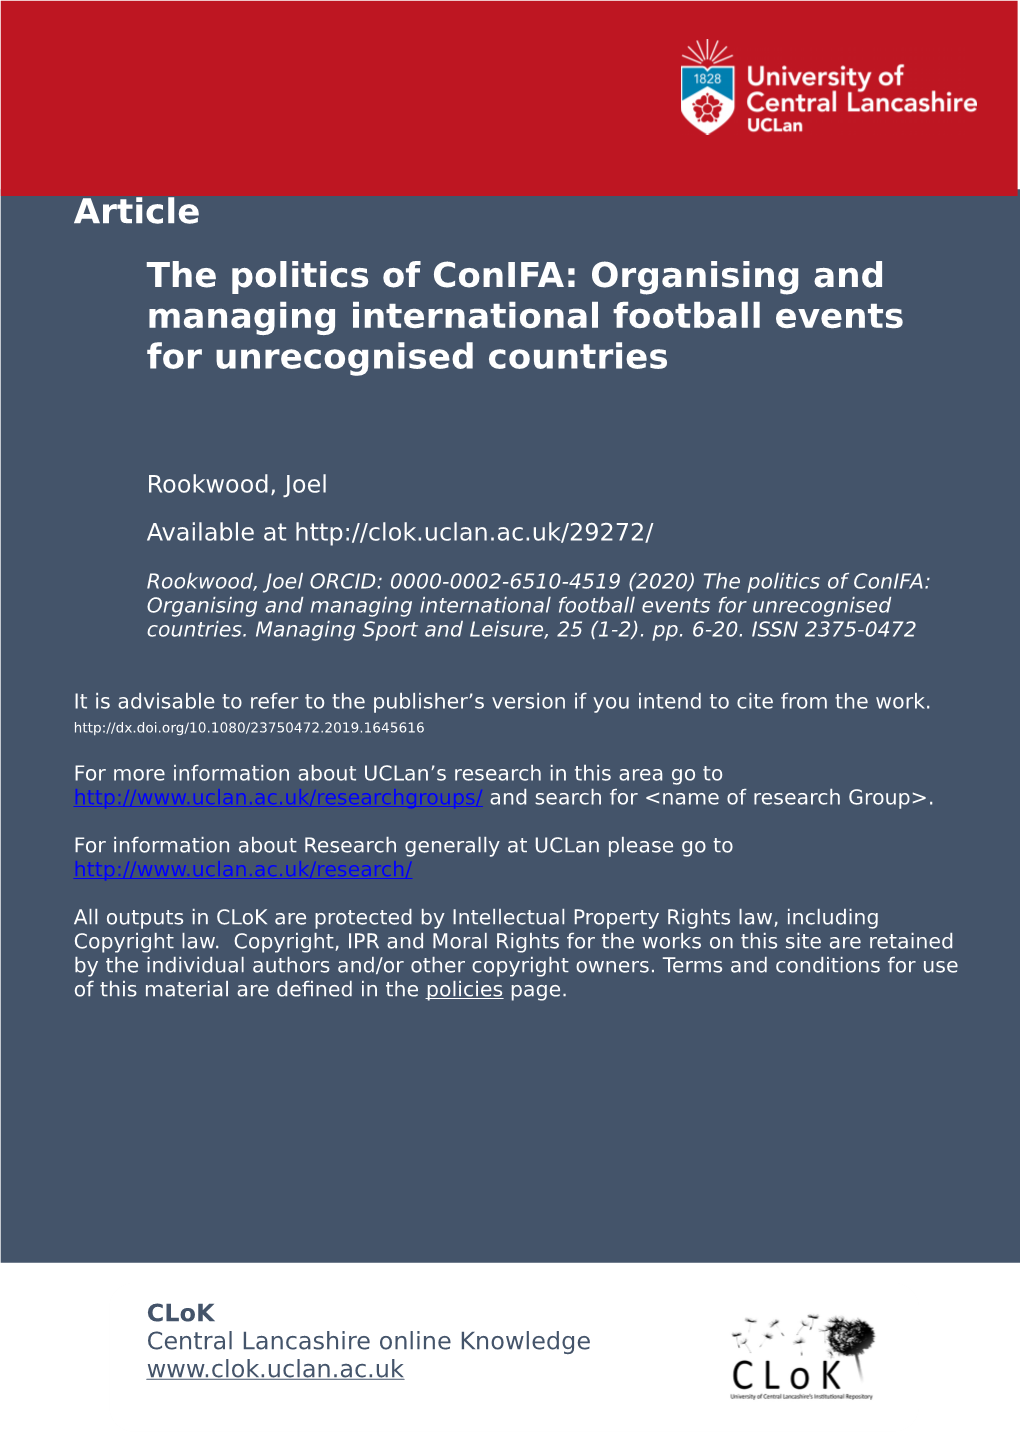 The Politics of Conifa: Organising and Managing International Football Events for Unrecognised Countries